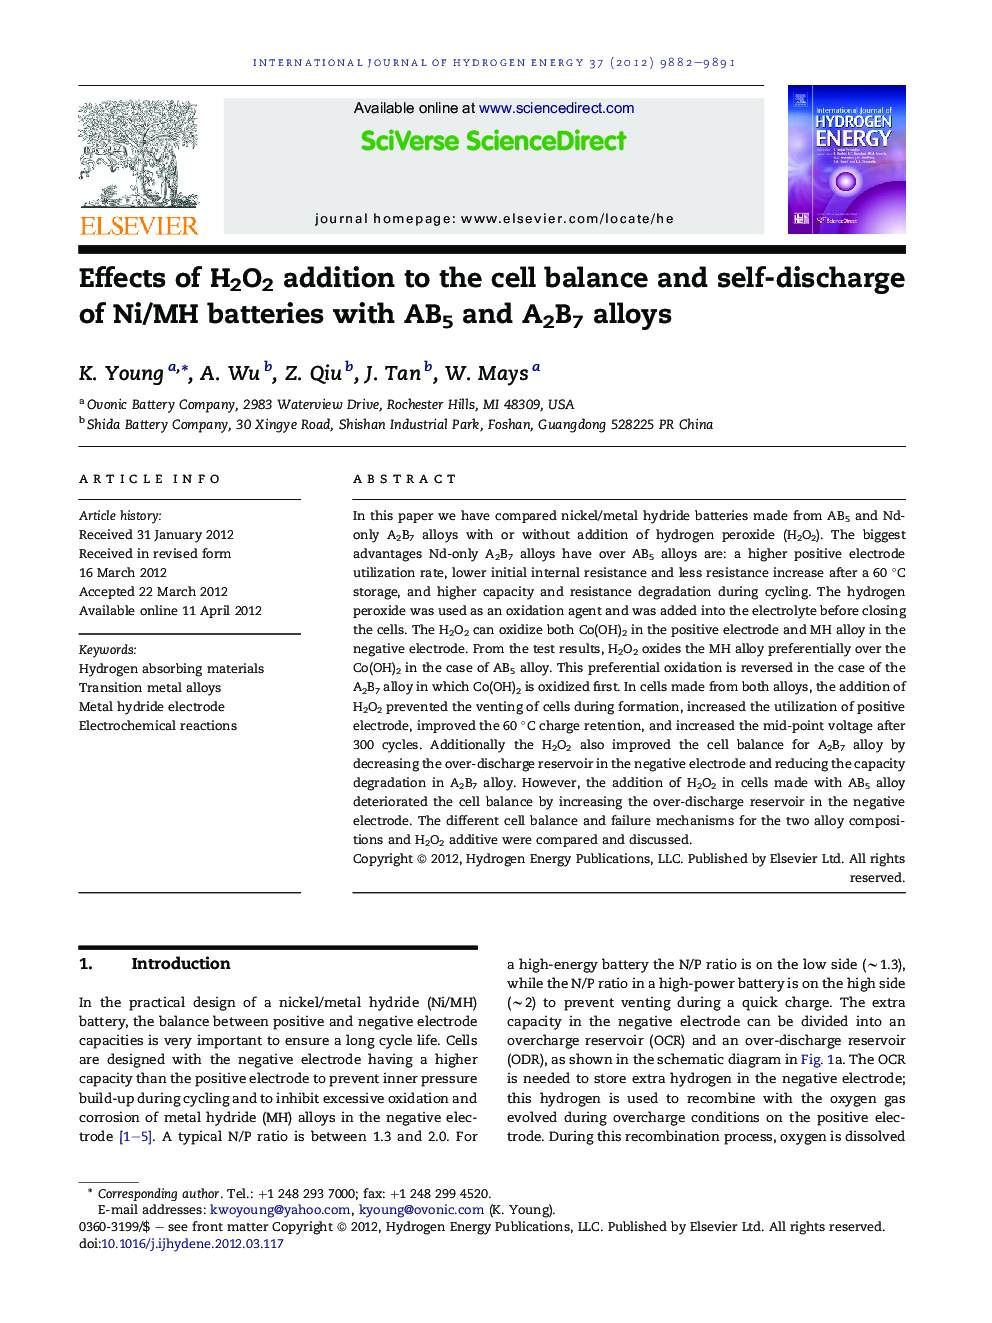 Effects of H2O2 addition to the cell balance and self-discharge of Ni/MH batteries with AB5 and A2B7 alloys